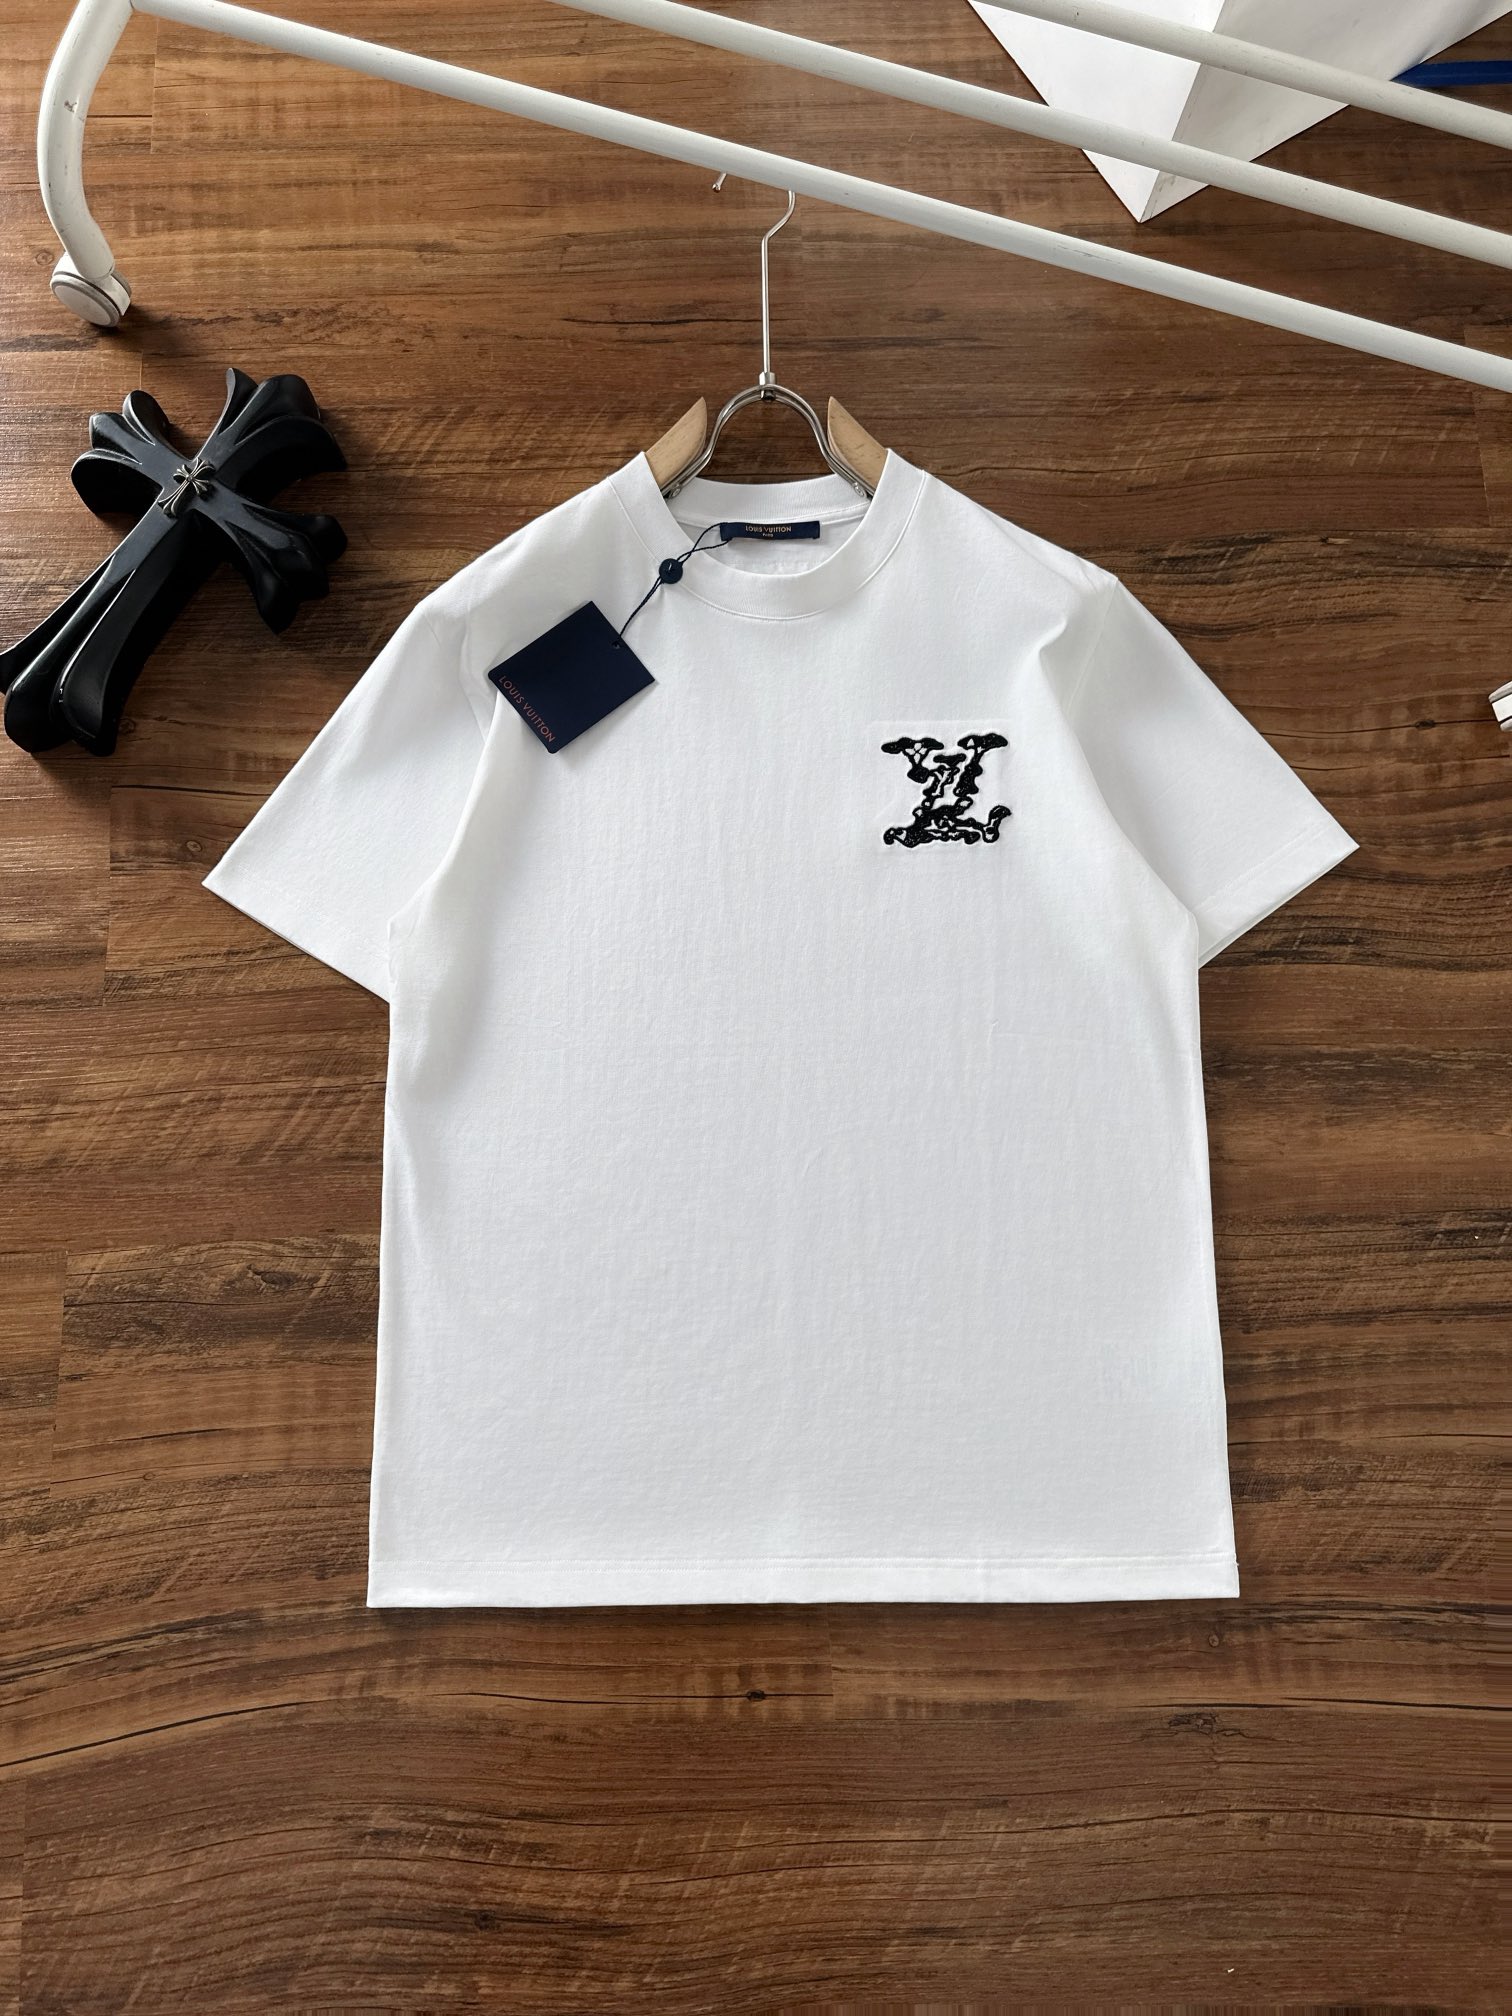 Louis Vuitton Clothing T-Shirt Spring/Summer Collection Fashion Short Sleeve